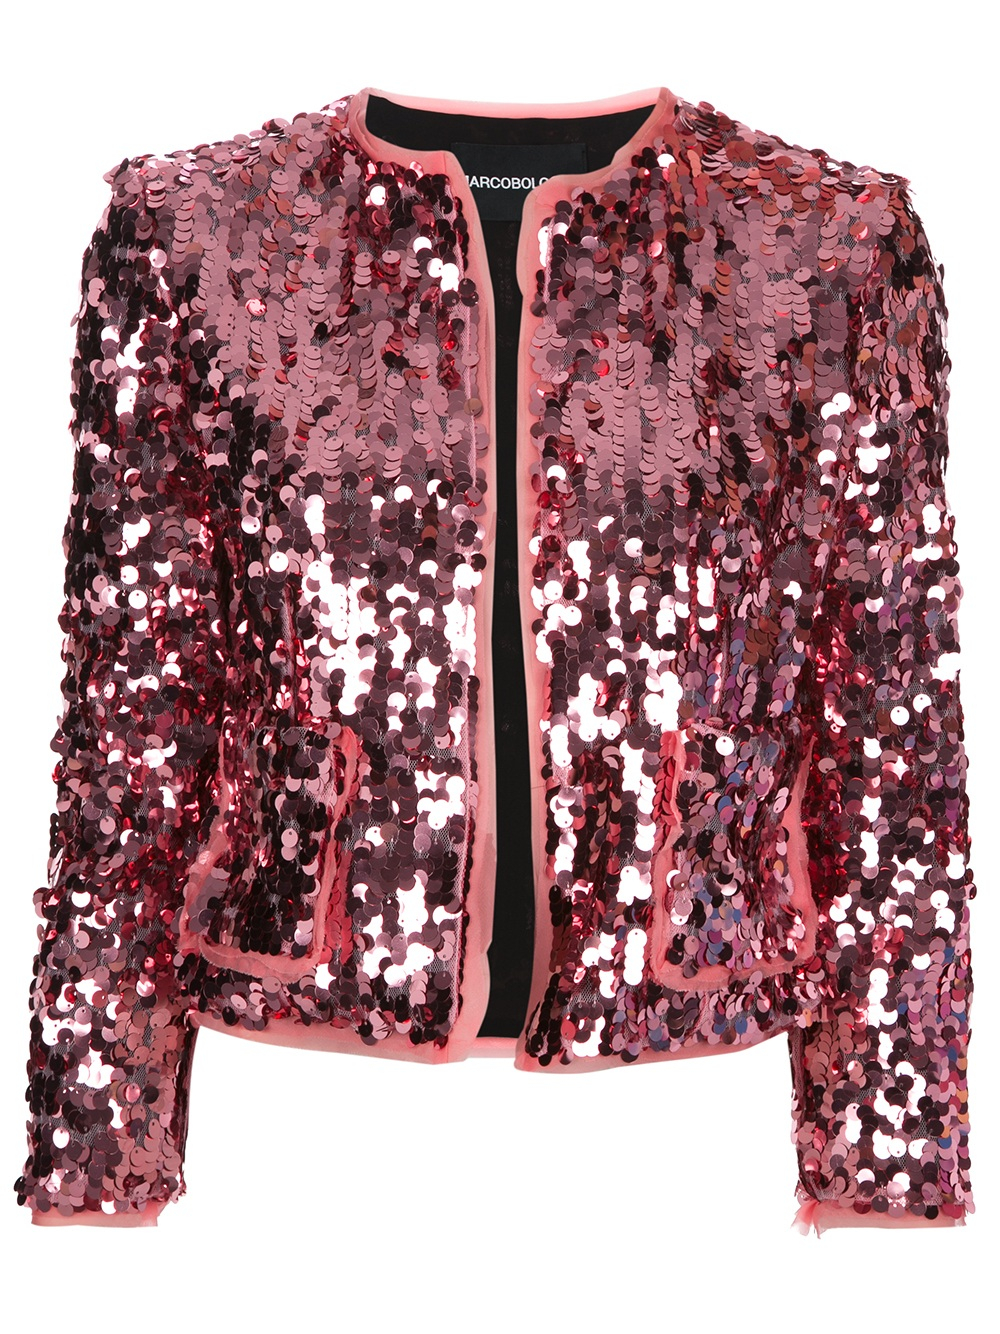 Lyst - Marco Bologna Sequin Jacket in Pink